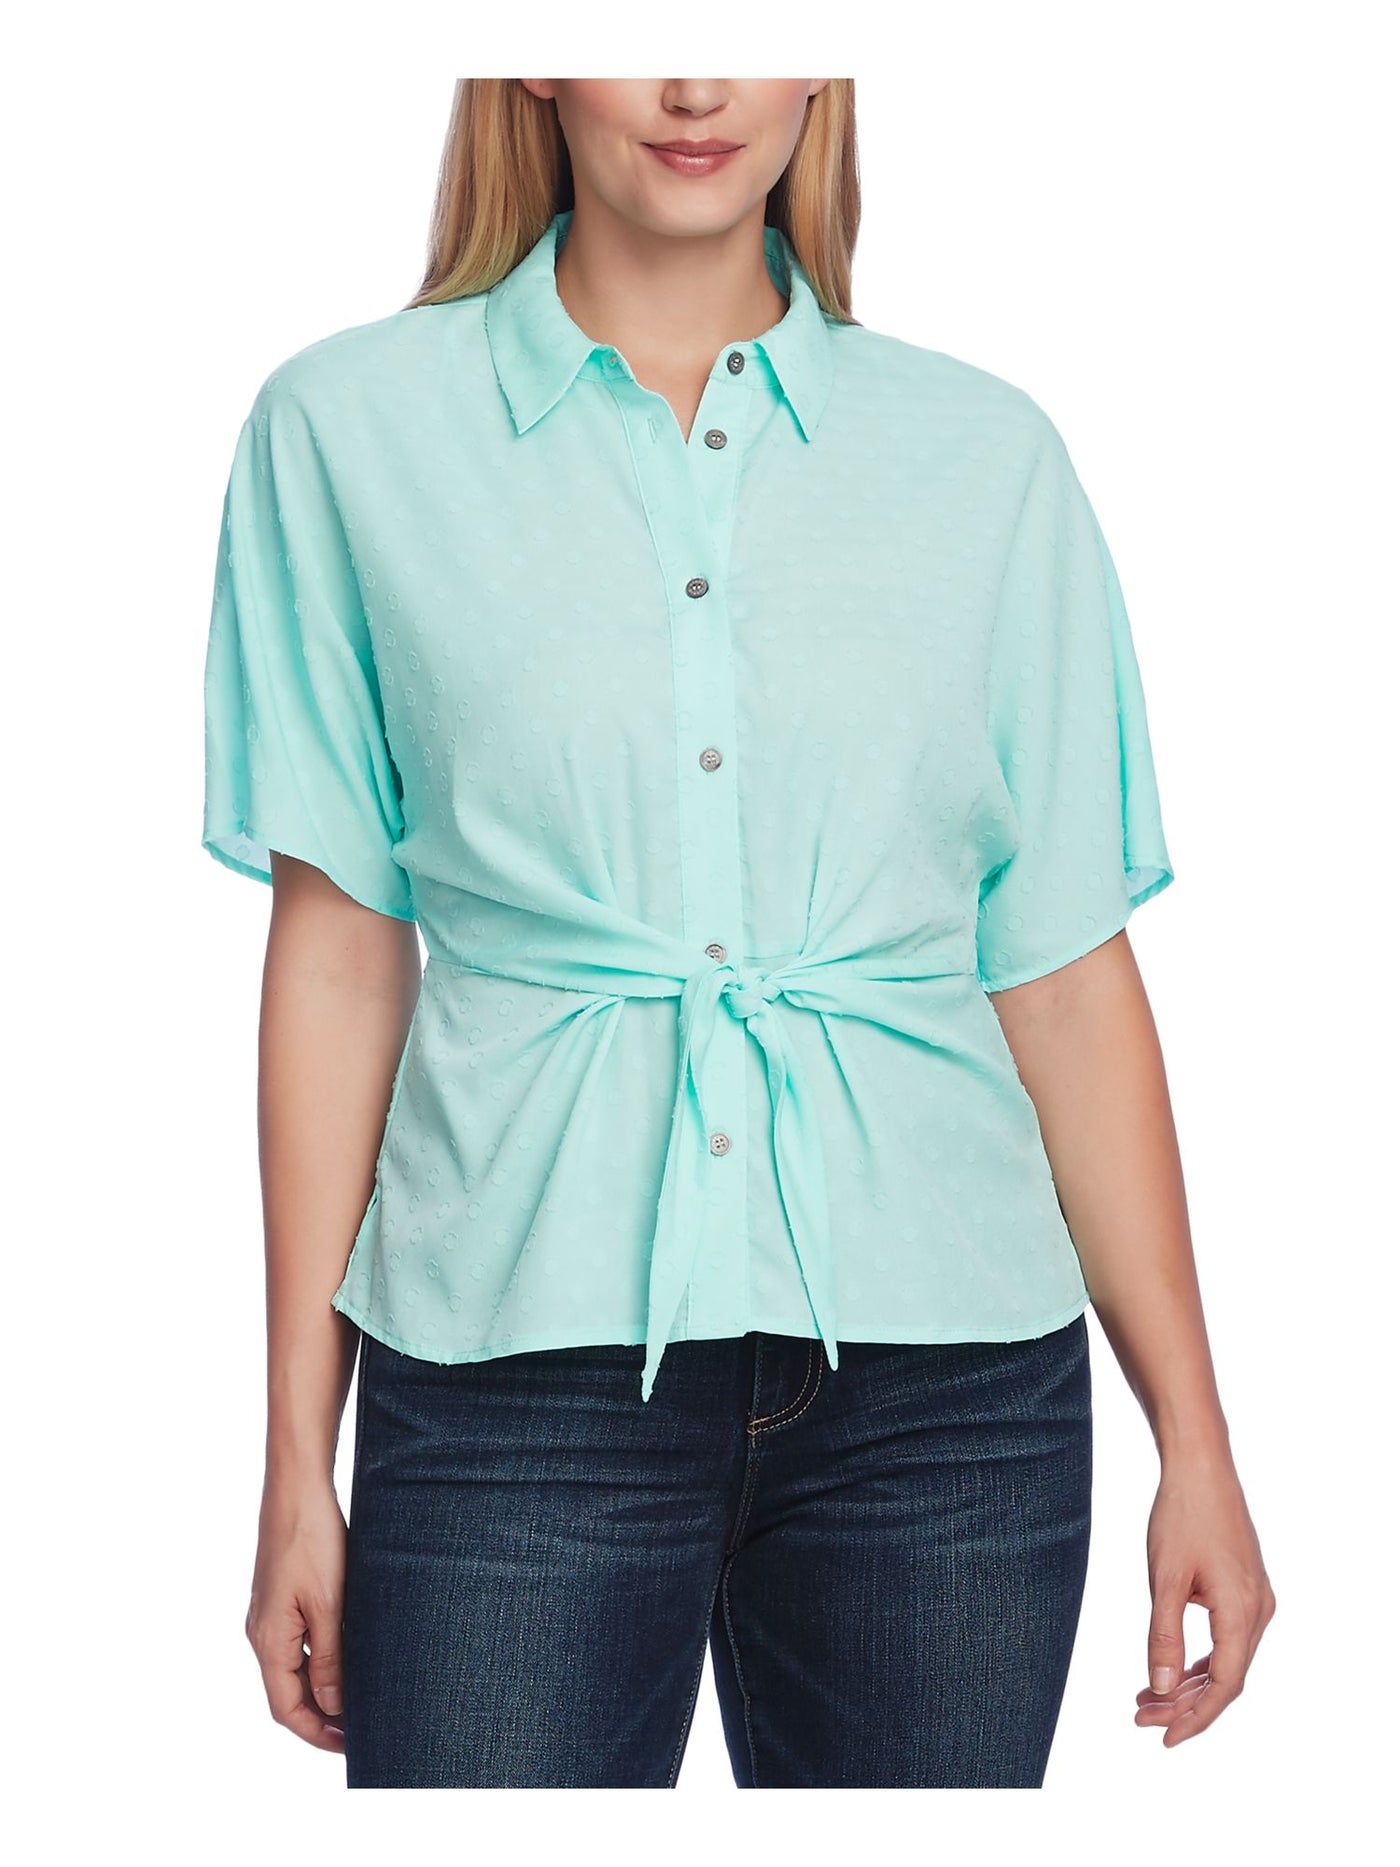 VINCE CAMUTO Womens Textured Short Sleeve Collared Button Up Top